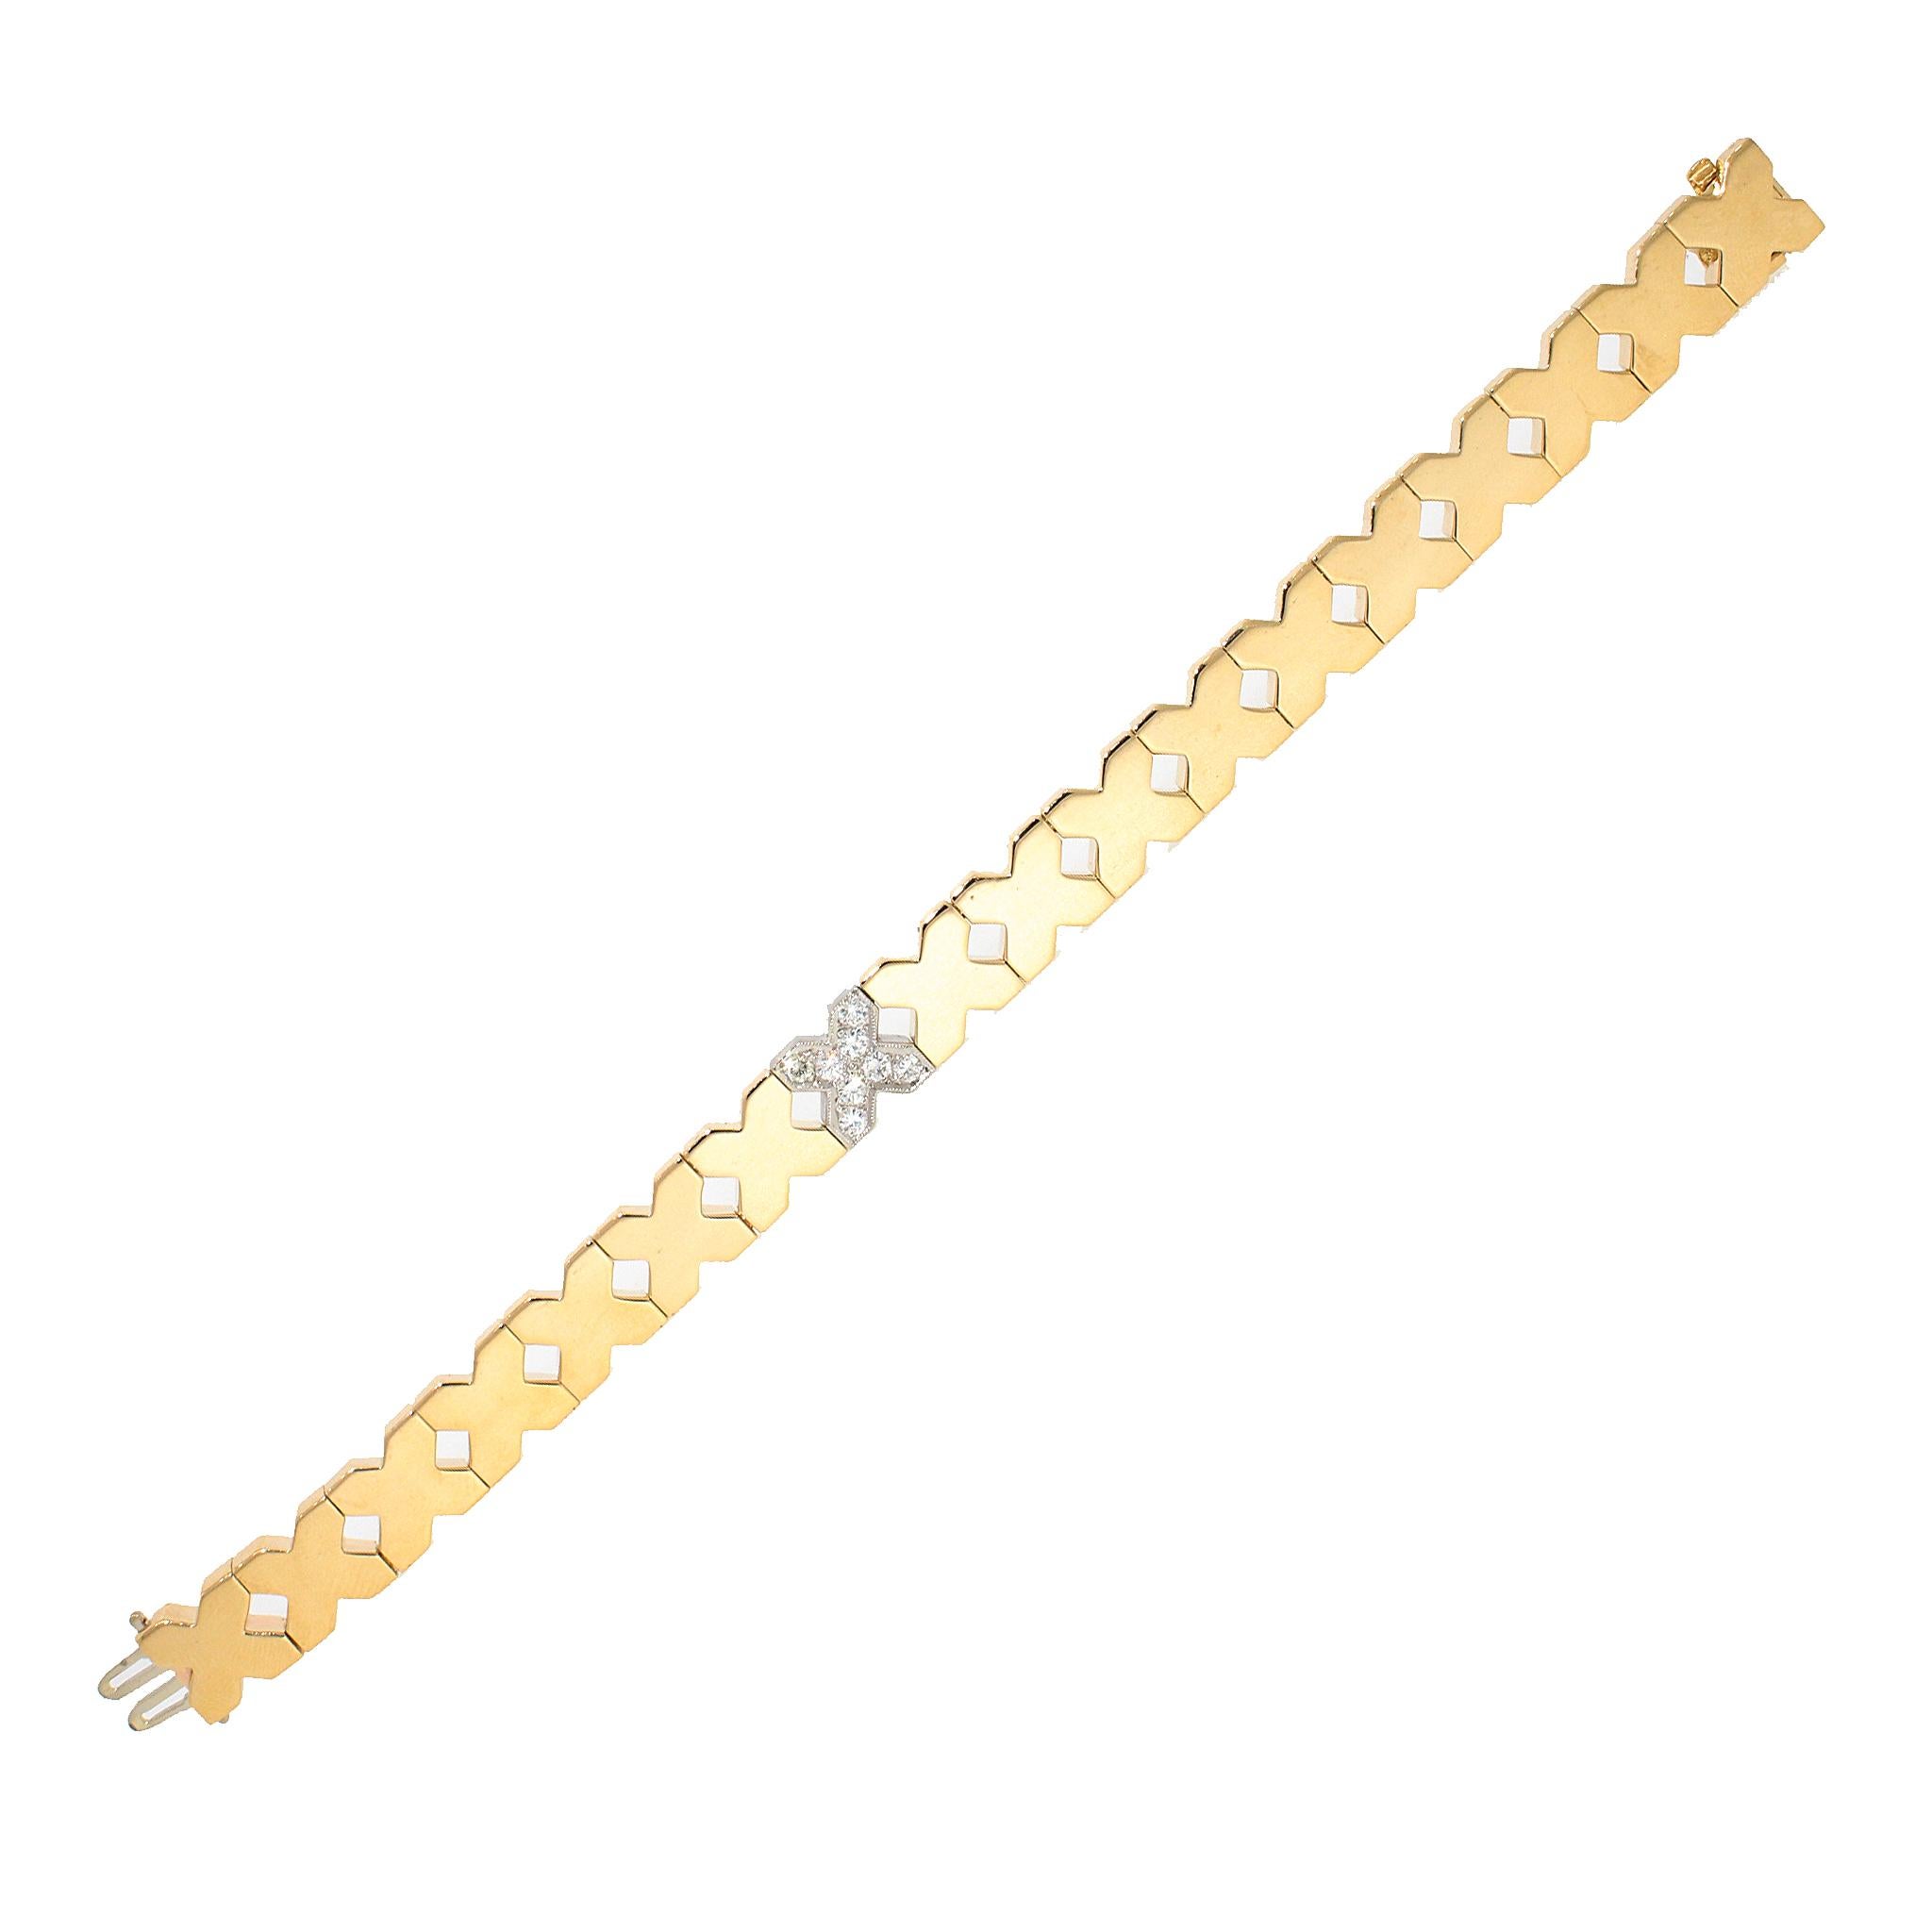 14 kt Yellow Gold
Diamond: 0.40 ct twd
Length: 6.75 inches
Total Weight: 24.4 grams